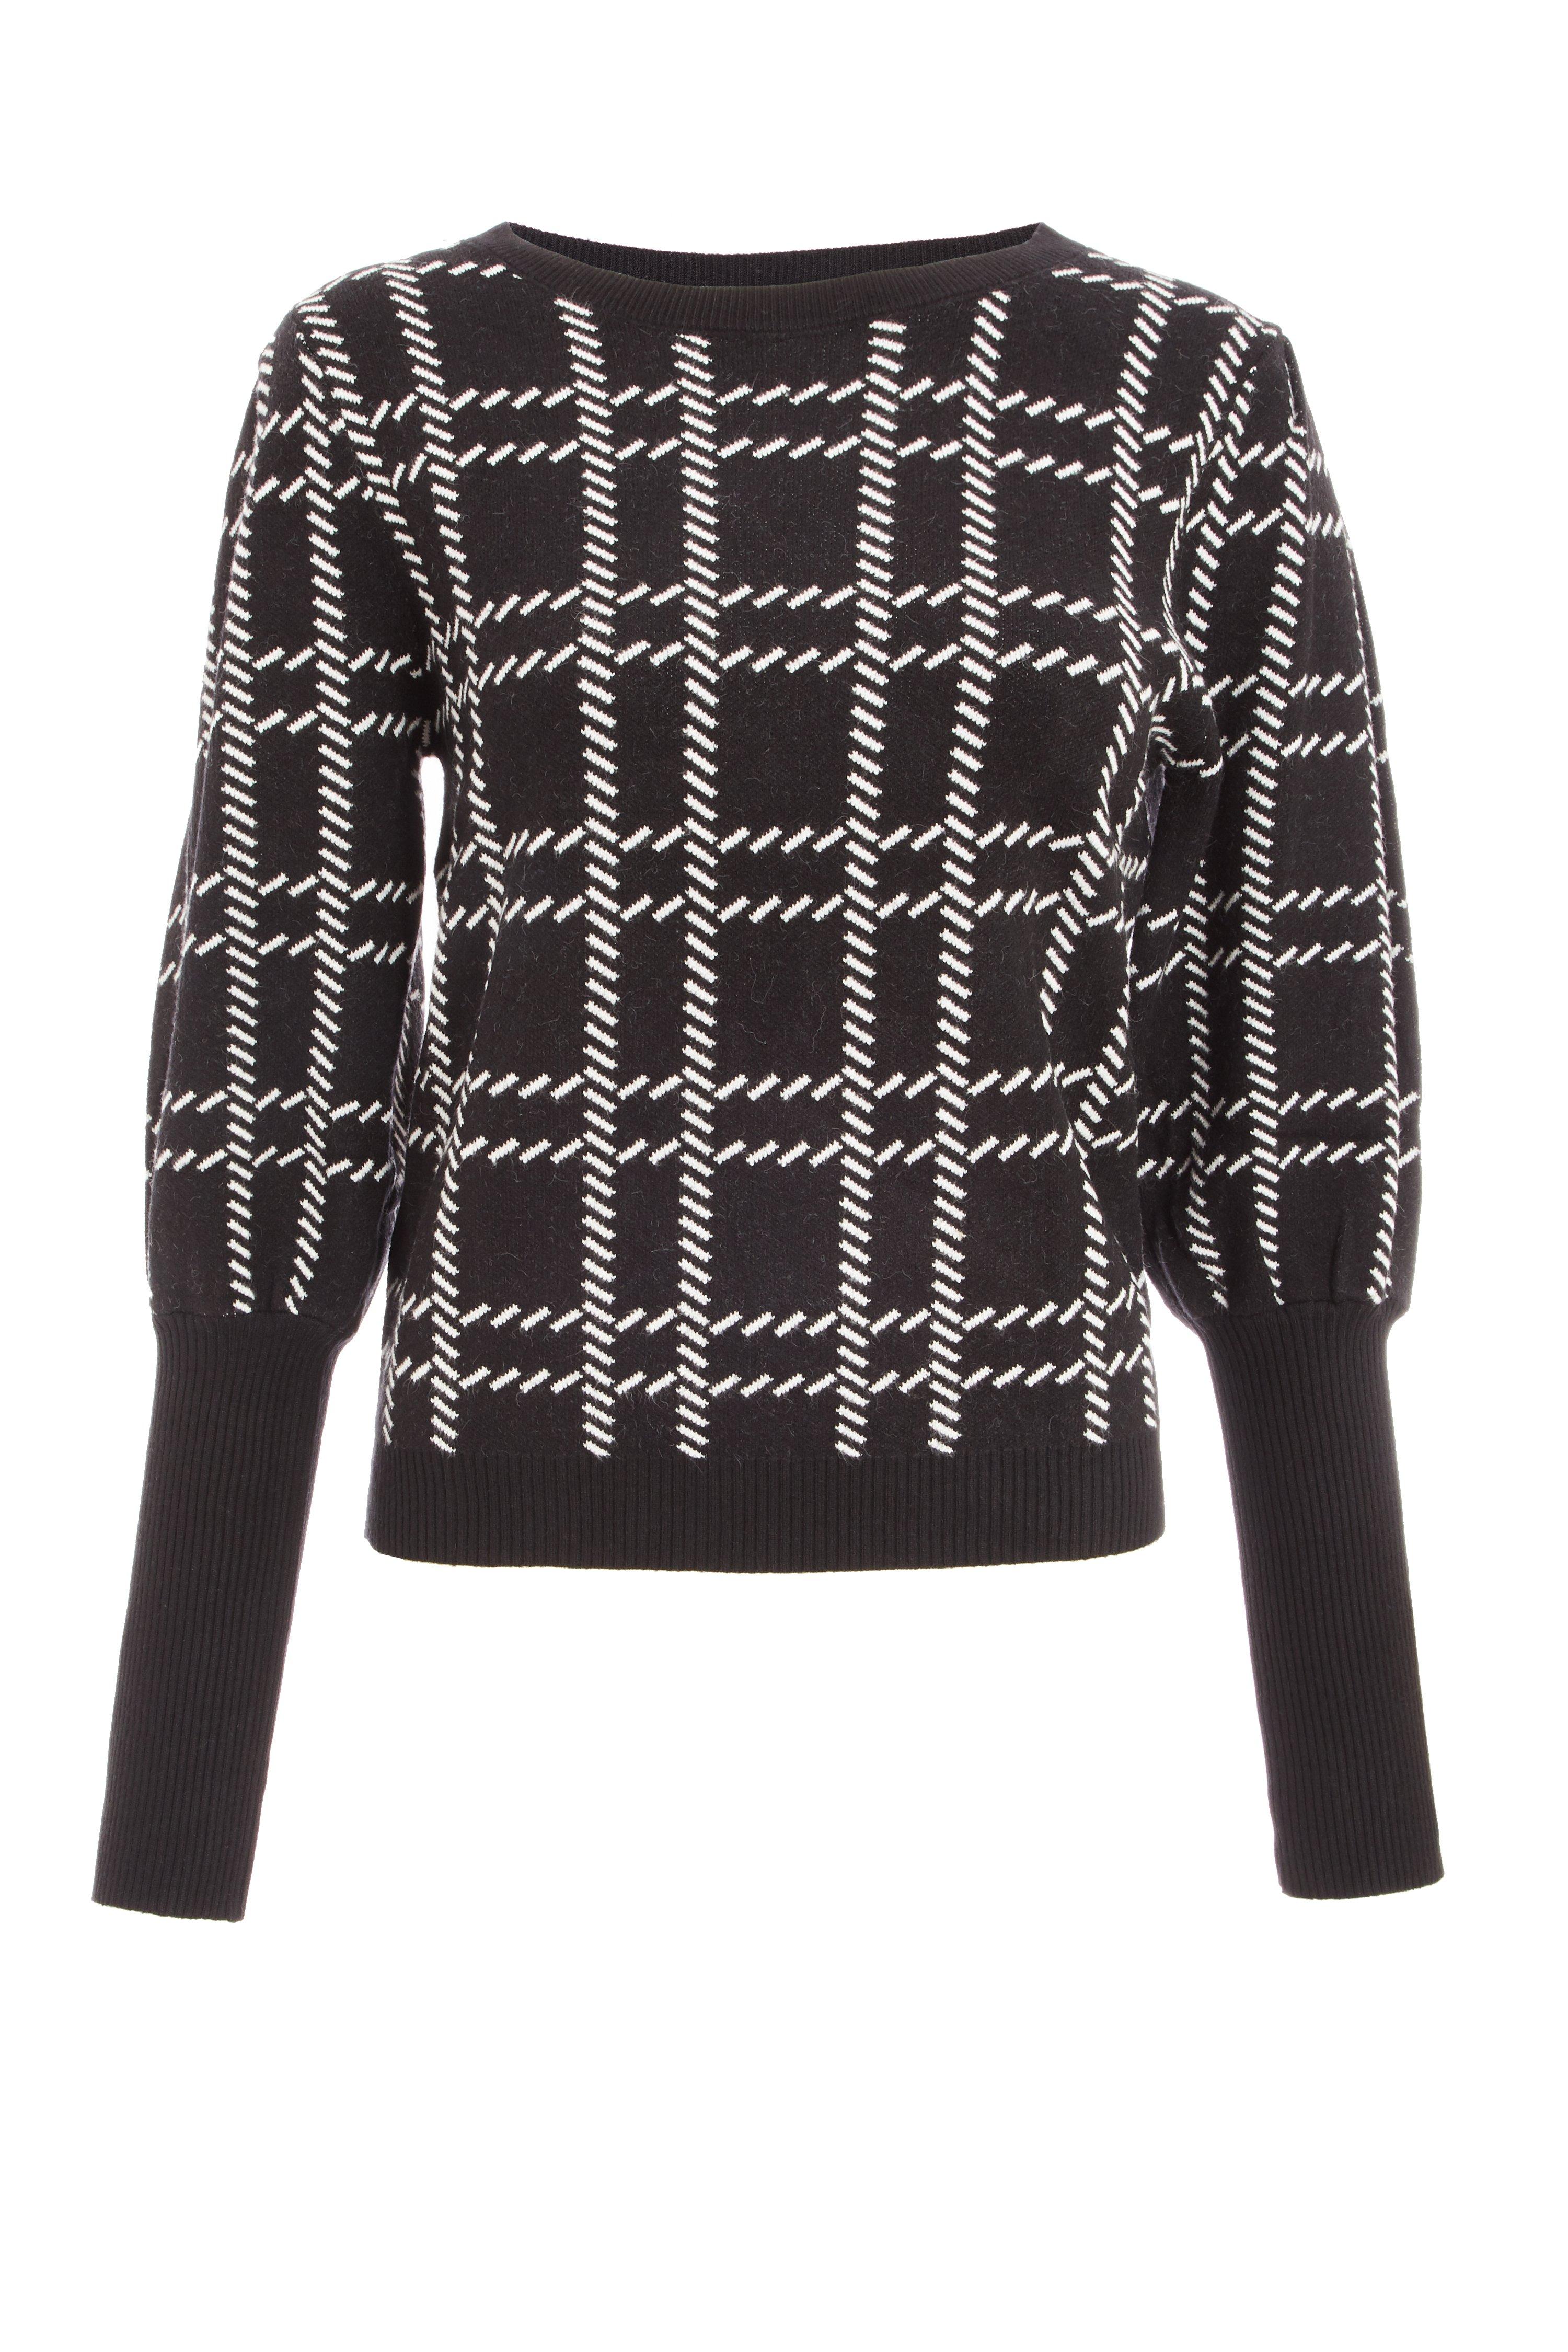 Black & White Check Knitted Jumper - Quiz Clothing